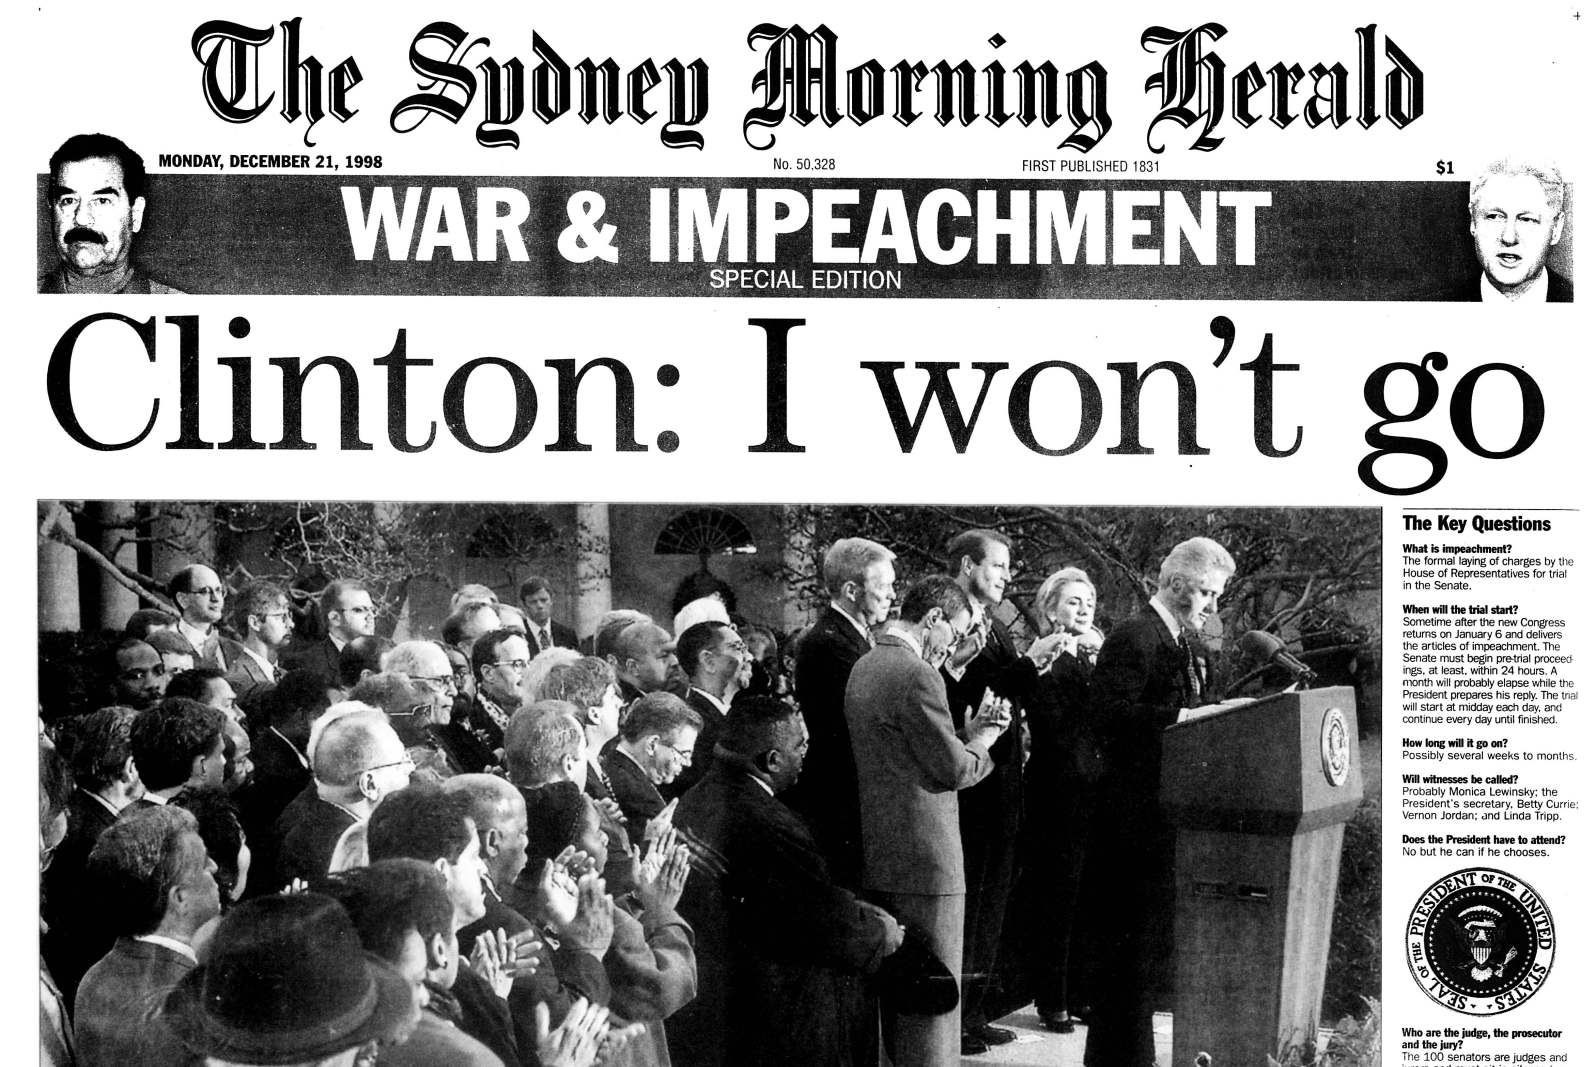 Page 1 of the Herald,  21 December 1998.  The Herald published a "War & Impeachment - Special Edition".